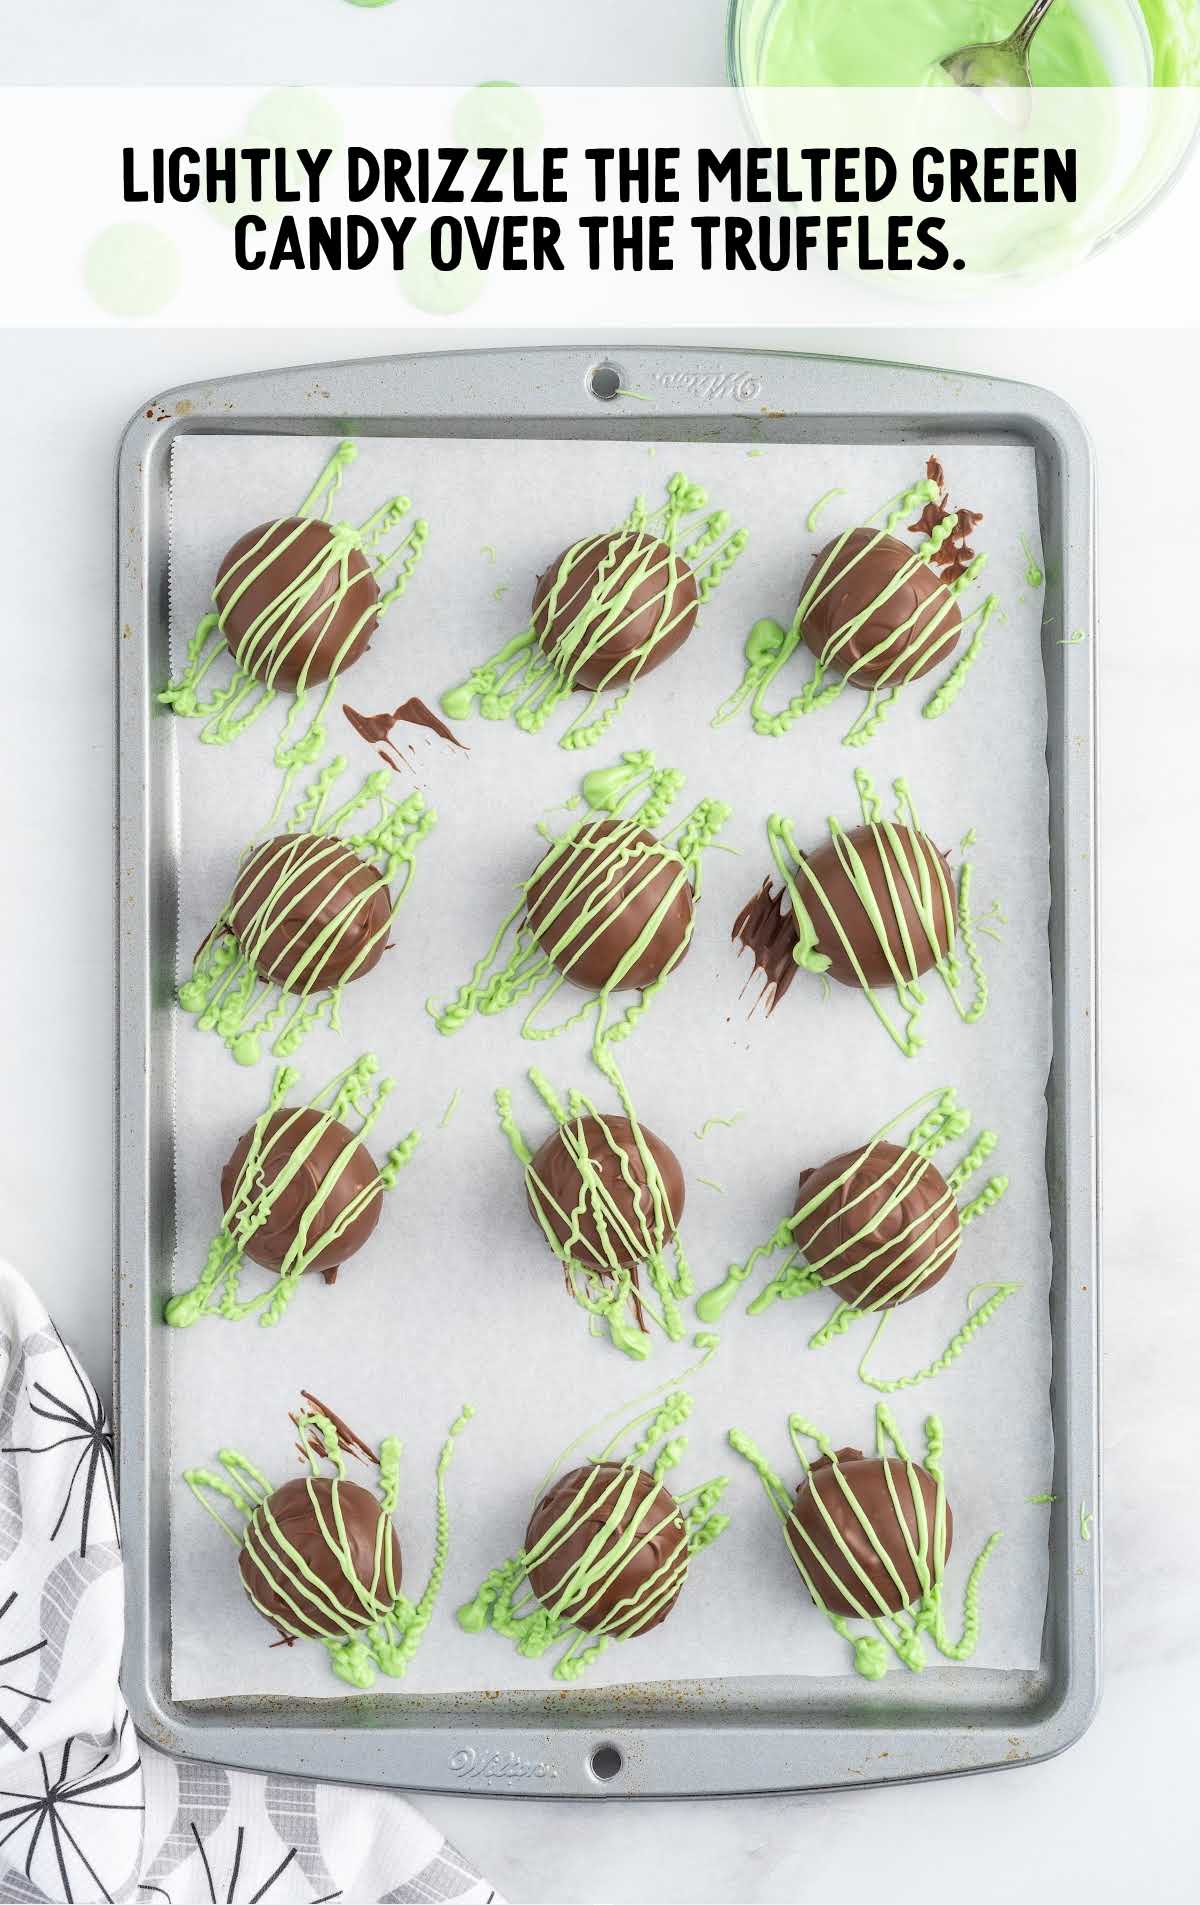 melted green candy drizzled over the truffles